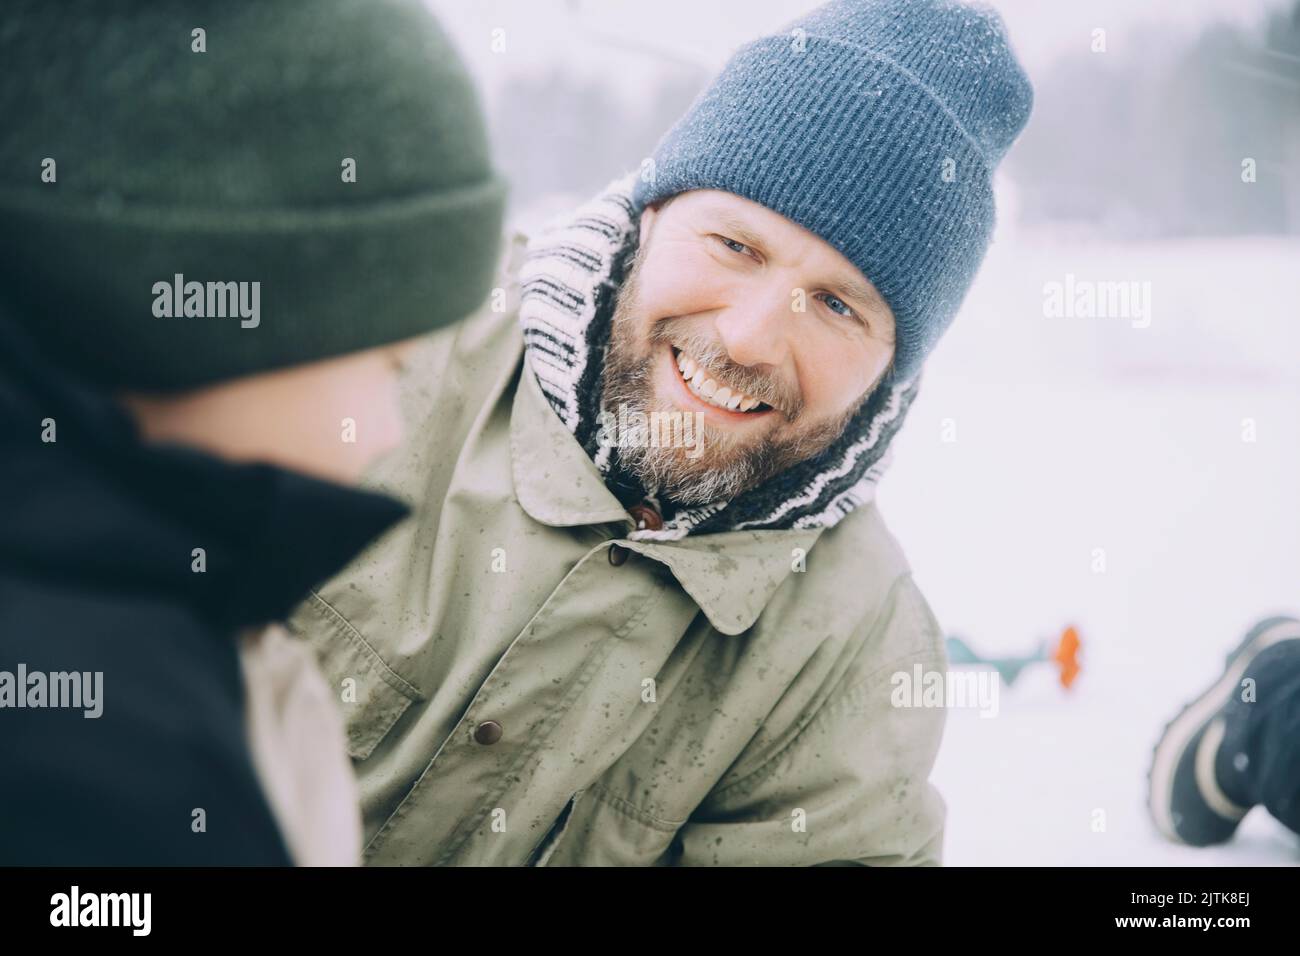 Happy mature man wearing knit hat talking with boy Stock Photo